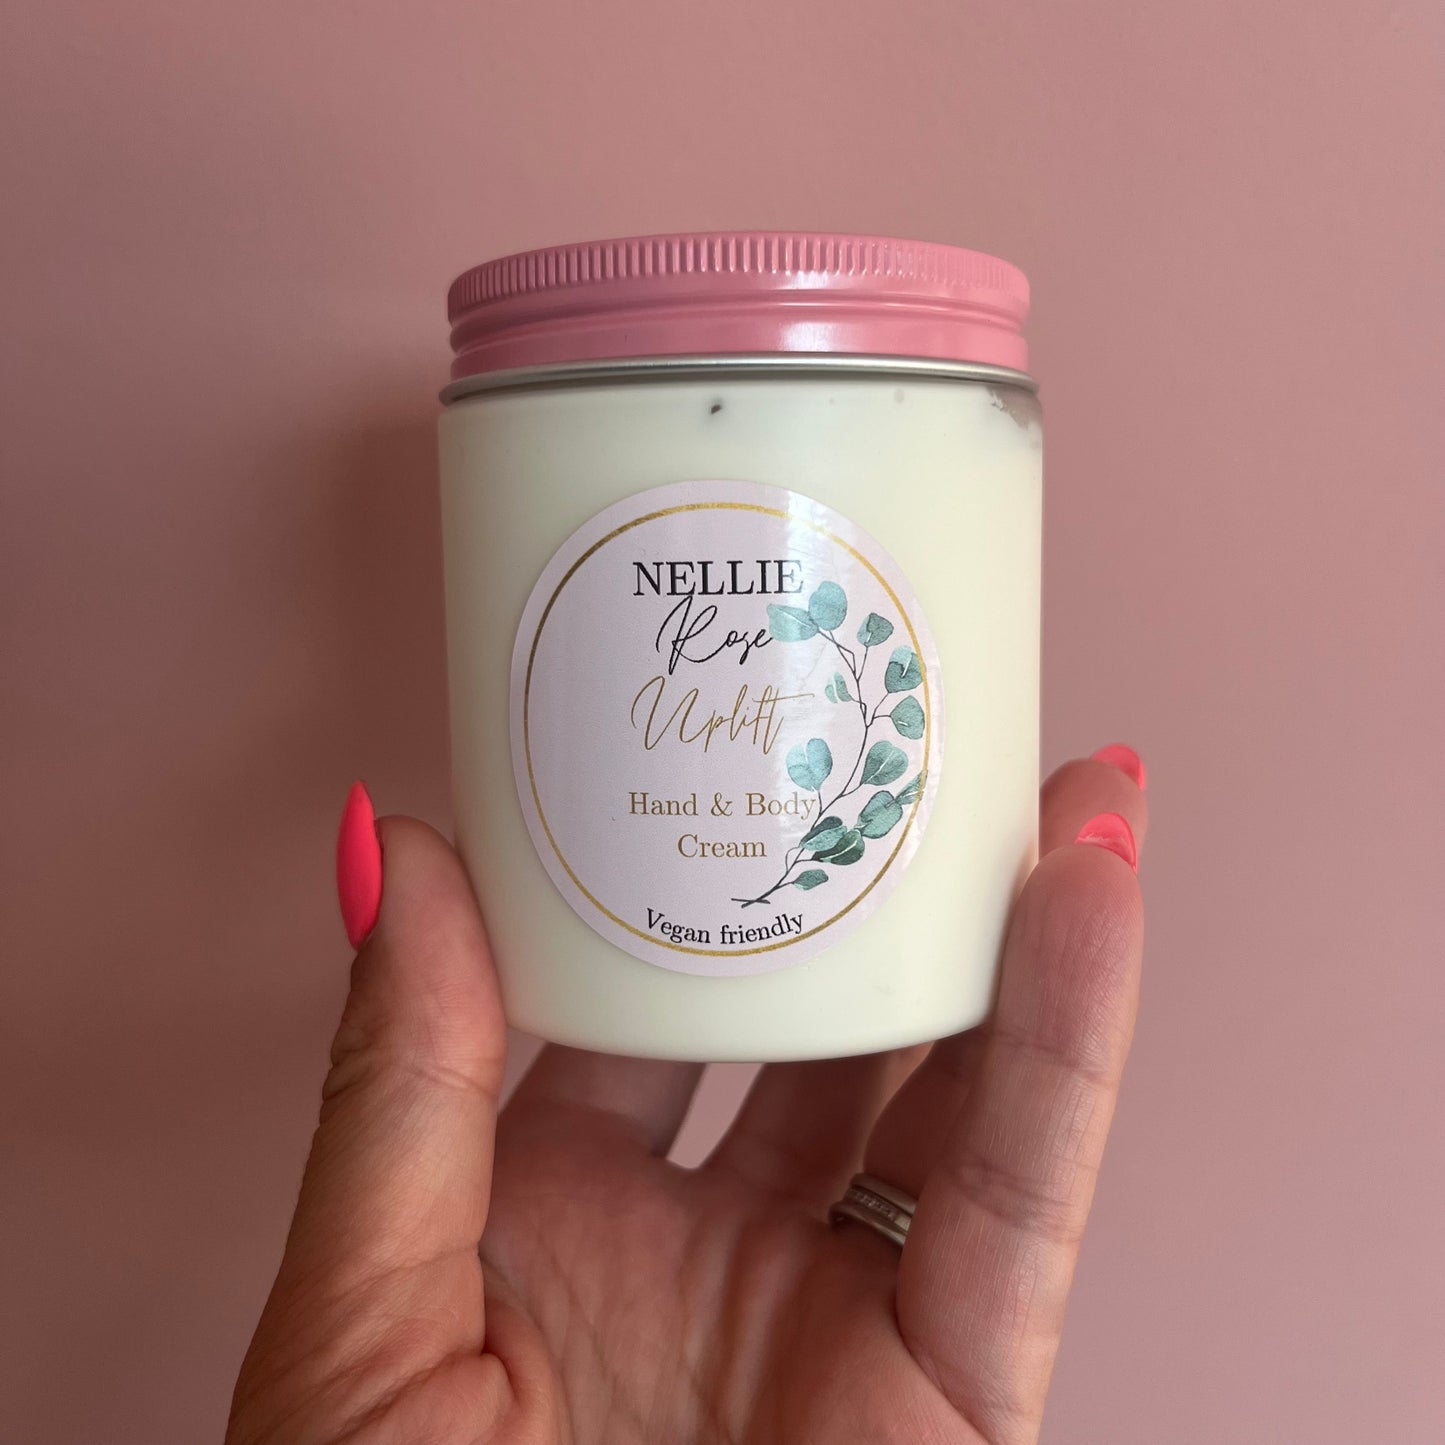 250g Hand and Body Cream frosted tub